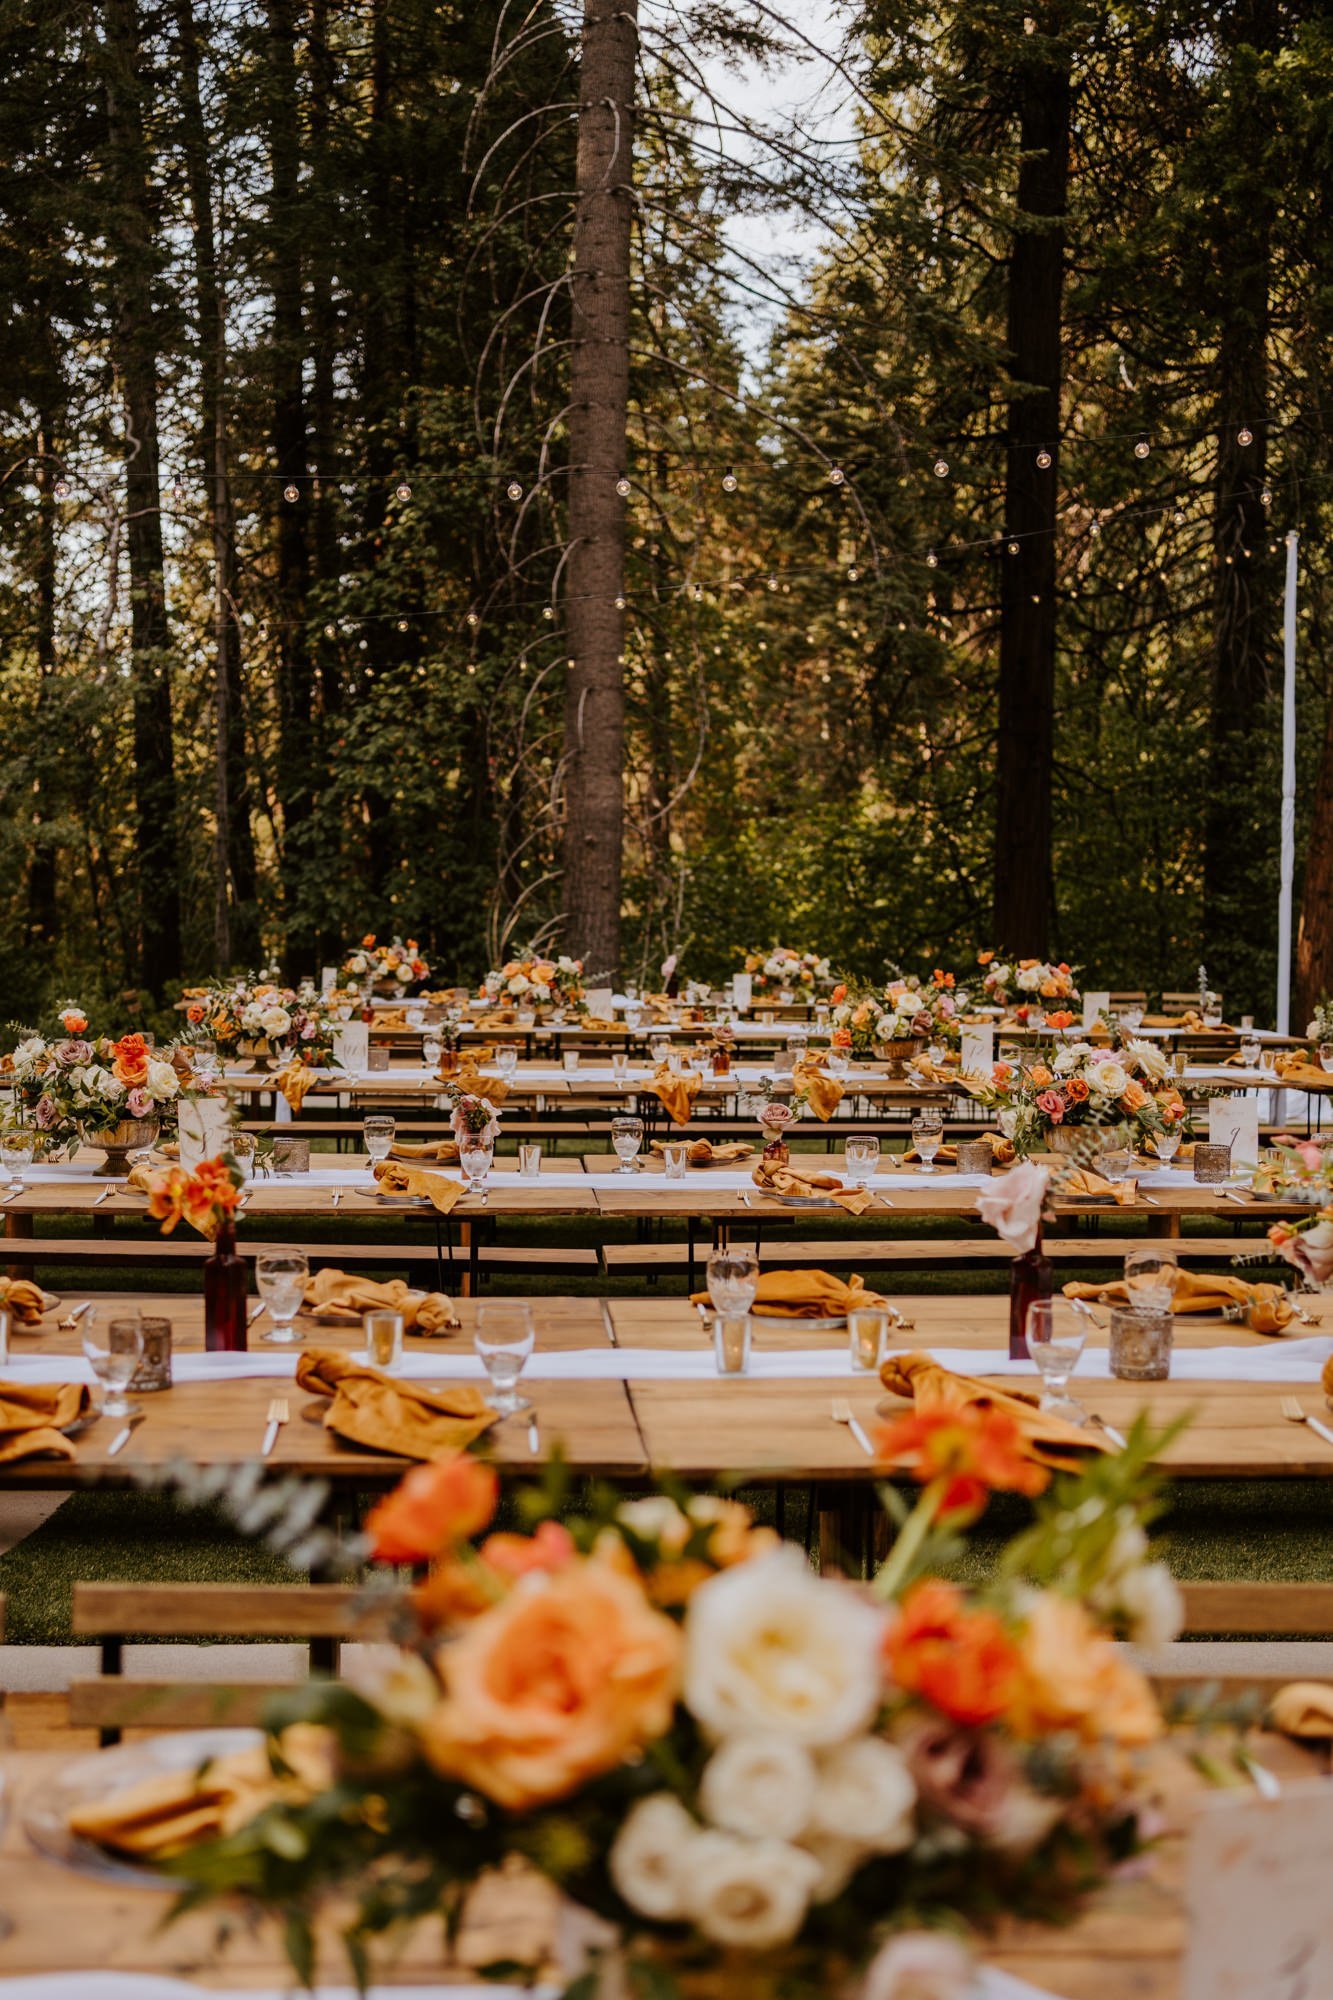 Enchanted forest castle wedding at Castle in the Forest in Lake Arrowhead, magical castle airbnb wedding, orange pink and beige wedding centerpiece, long tables, photography by Tida Svy